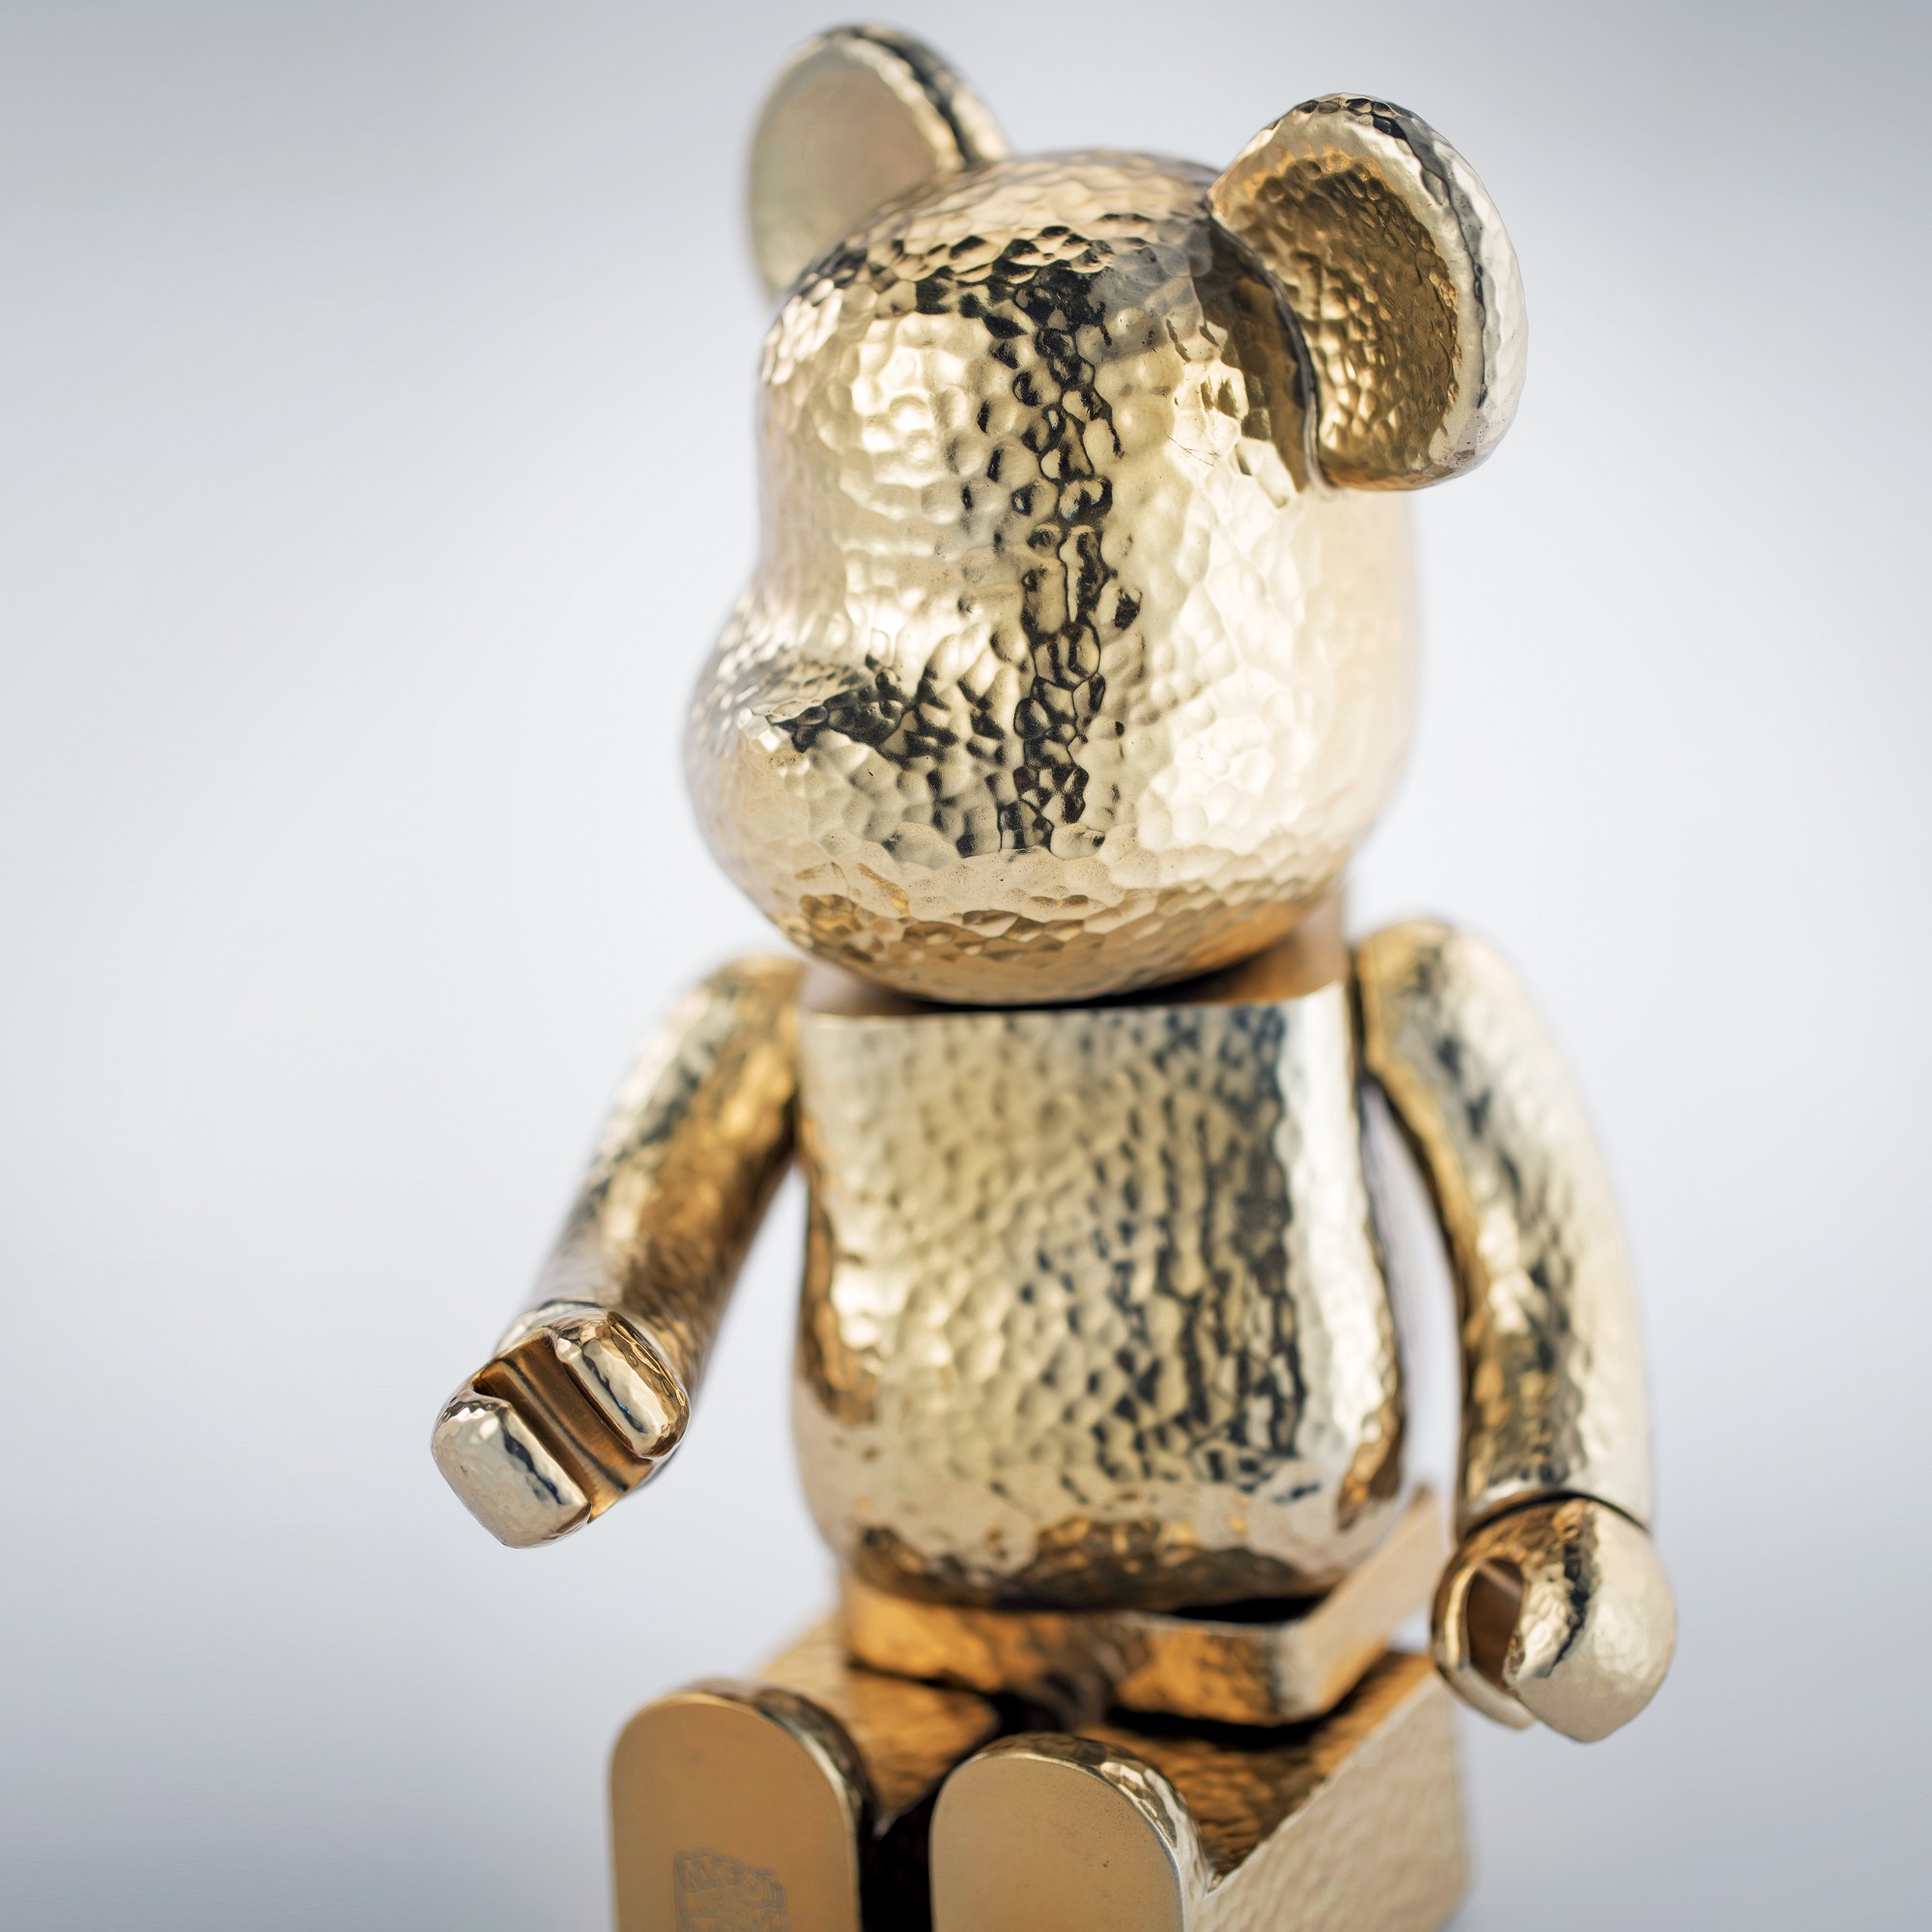 Royal Selangor & MEDICOM TOY Are 400% On Point With This Golden BE